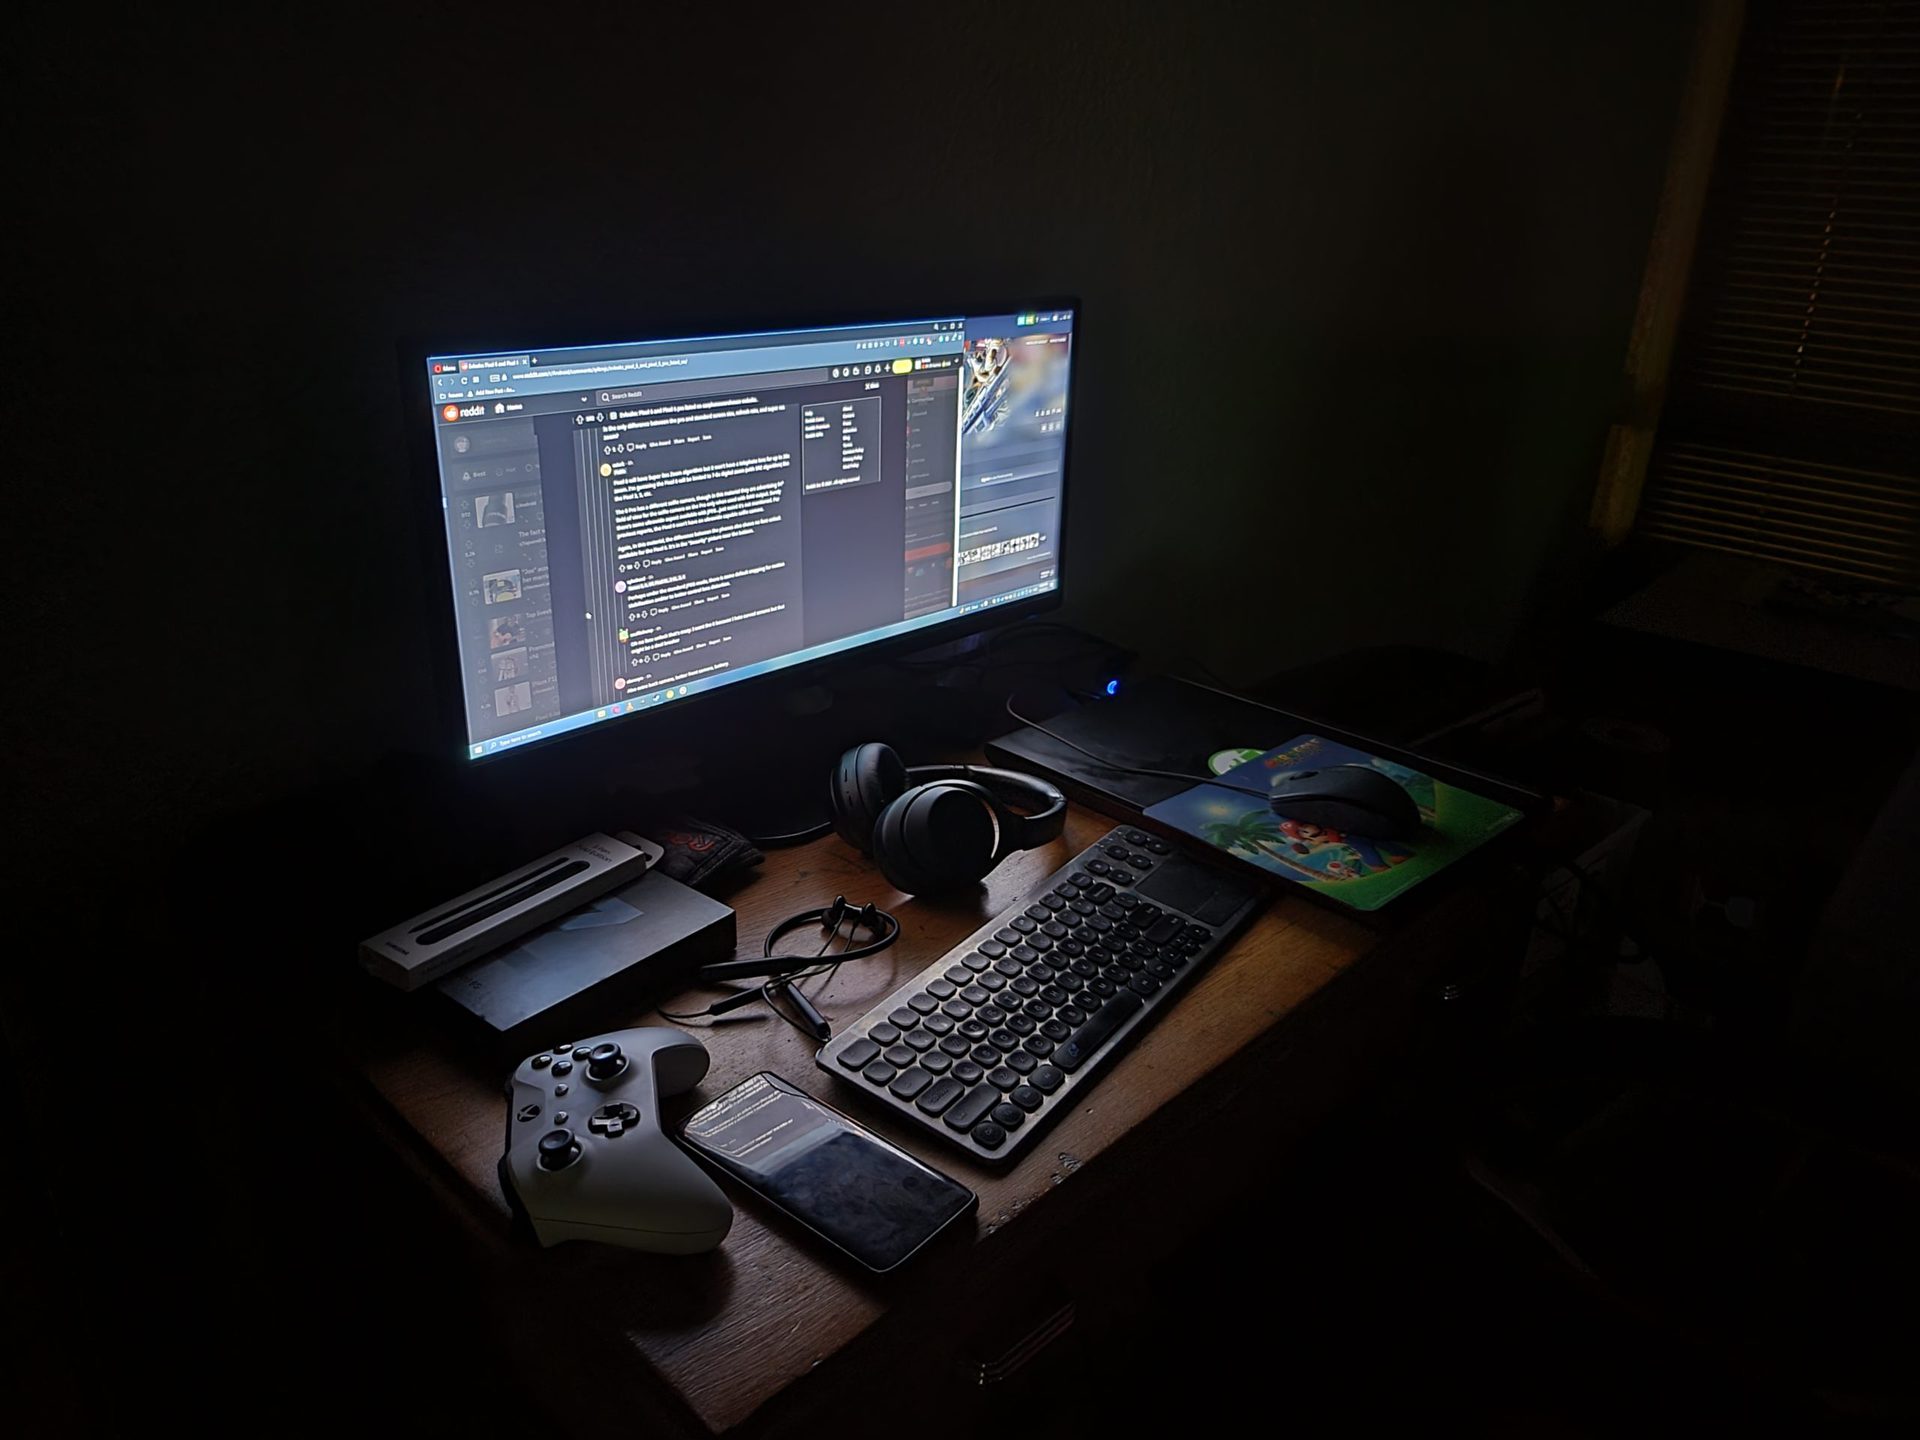 Galaxy Z Fold 3 desk low light night mode shot showing a keyboard, monitor, and accessories.